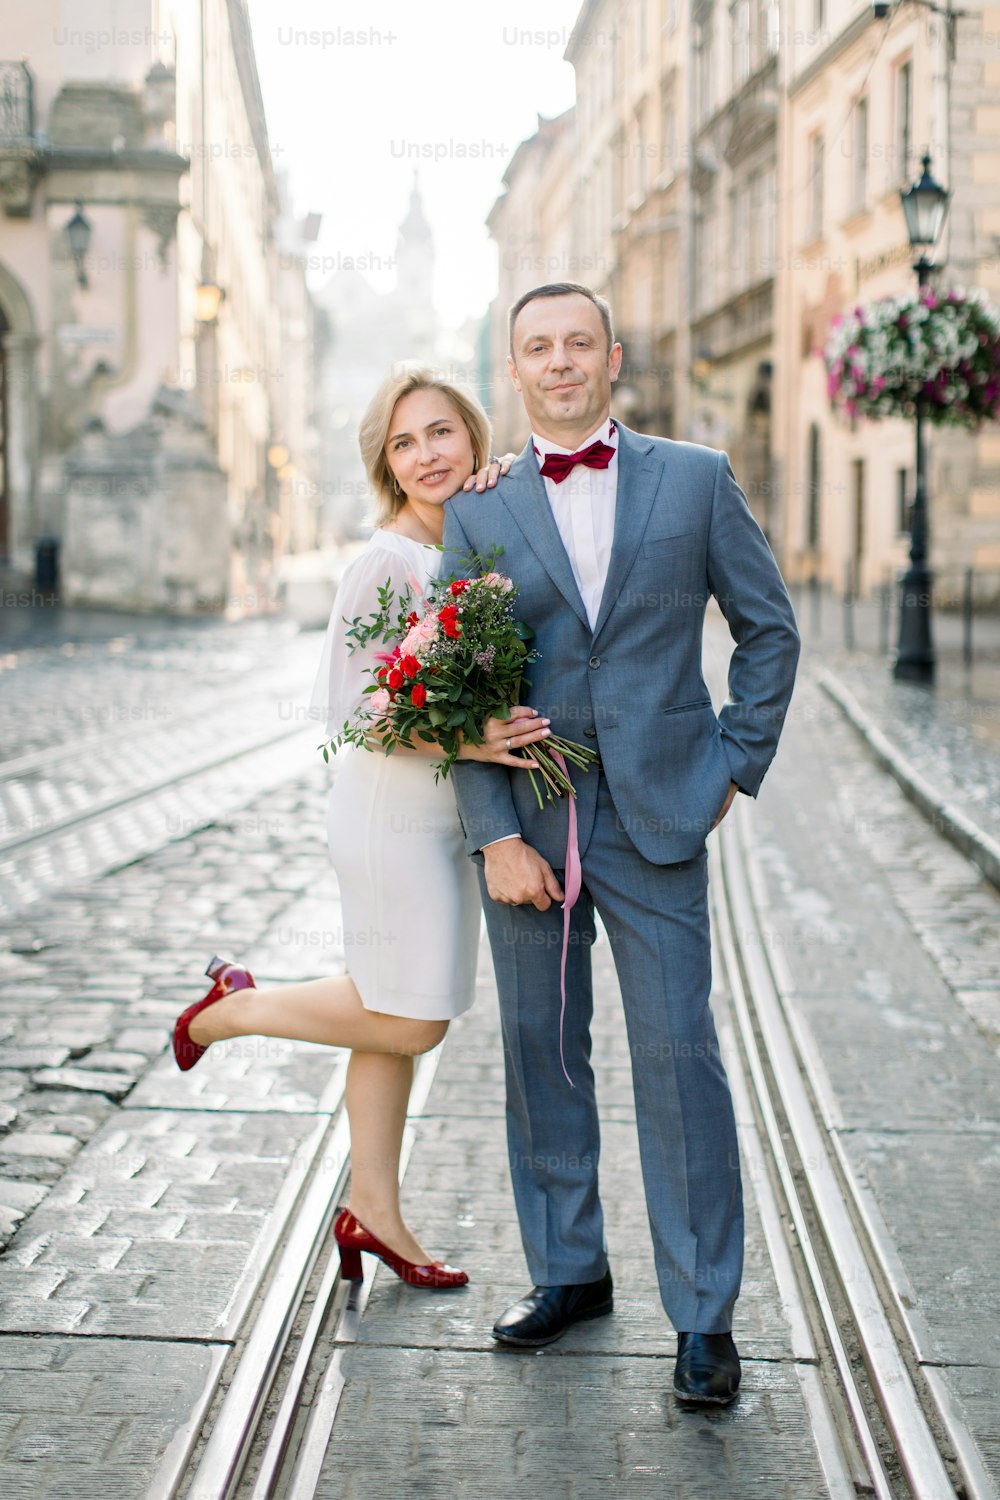 Wedding anniversary 25th celebration. Outdoor portrait of charming mature couple man and woman in elegant luxury clothes, posing together on tram railroad in ancient old city center